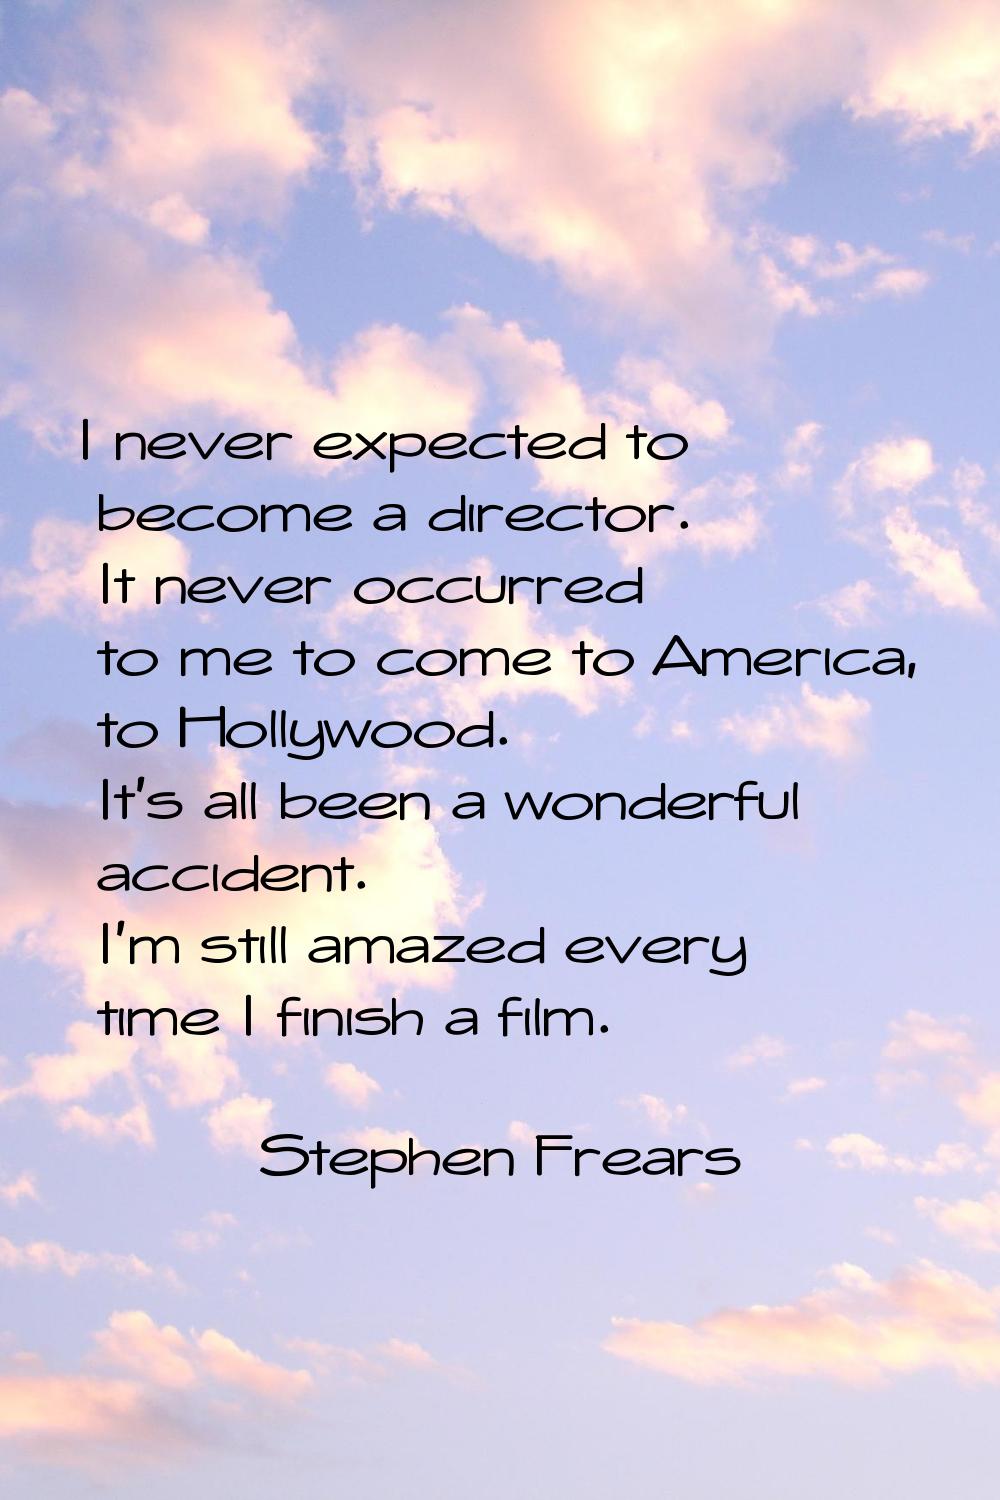 I never expected to become a director. It never occurred to me to come to America, to Hollywood. It